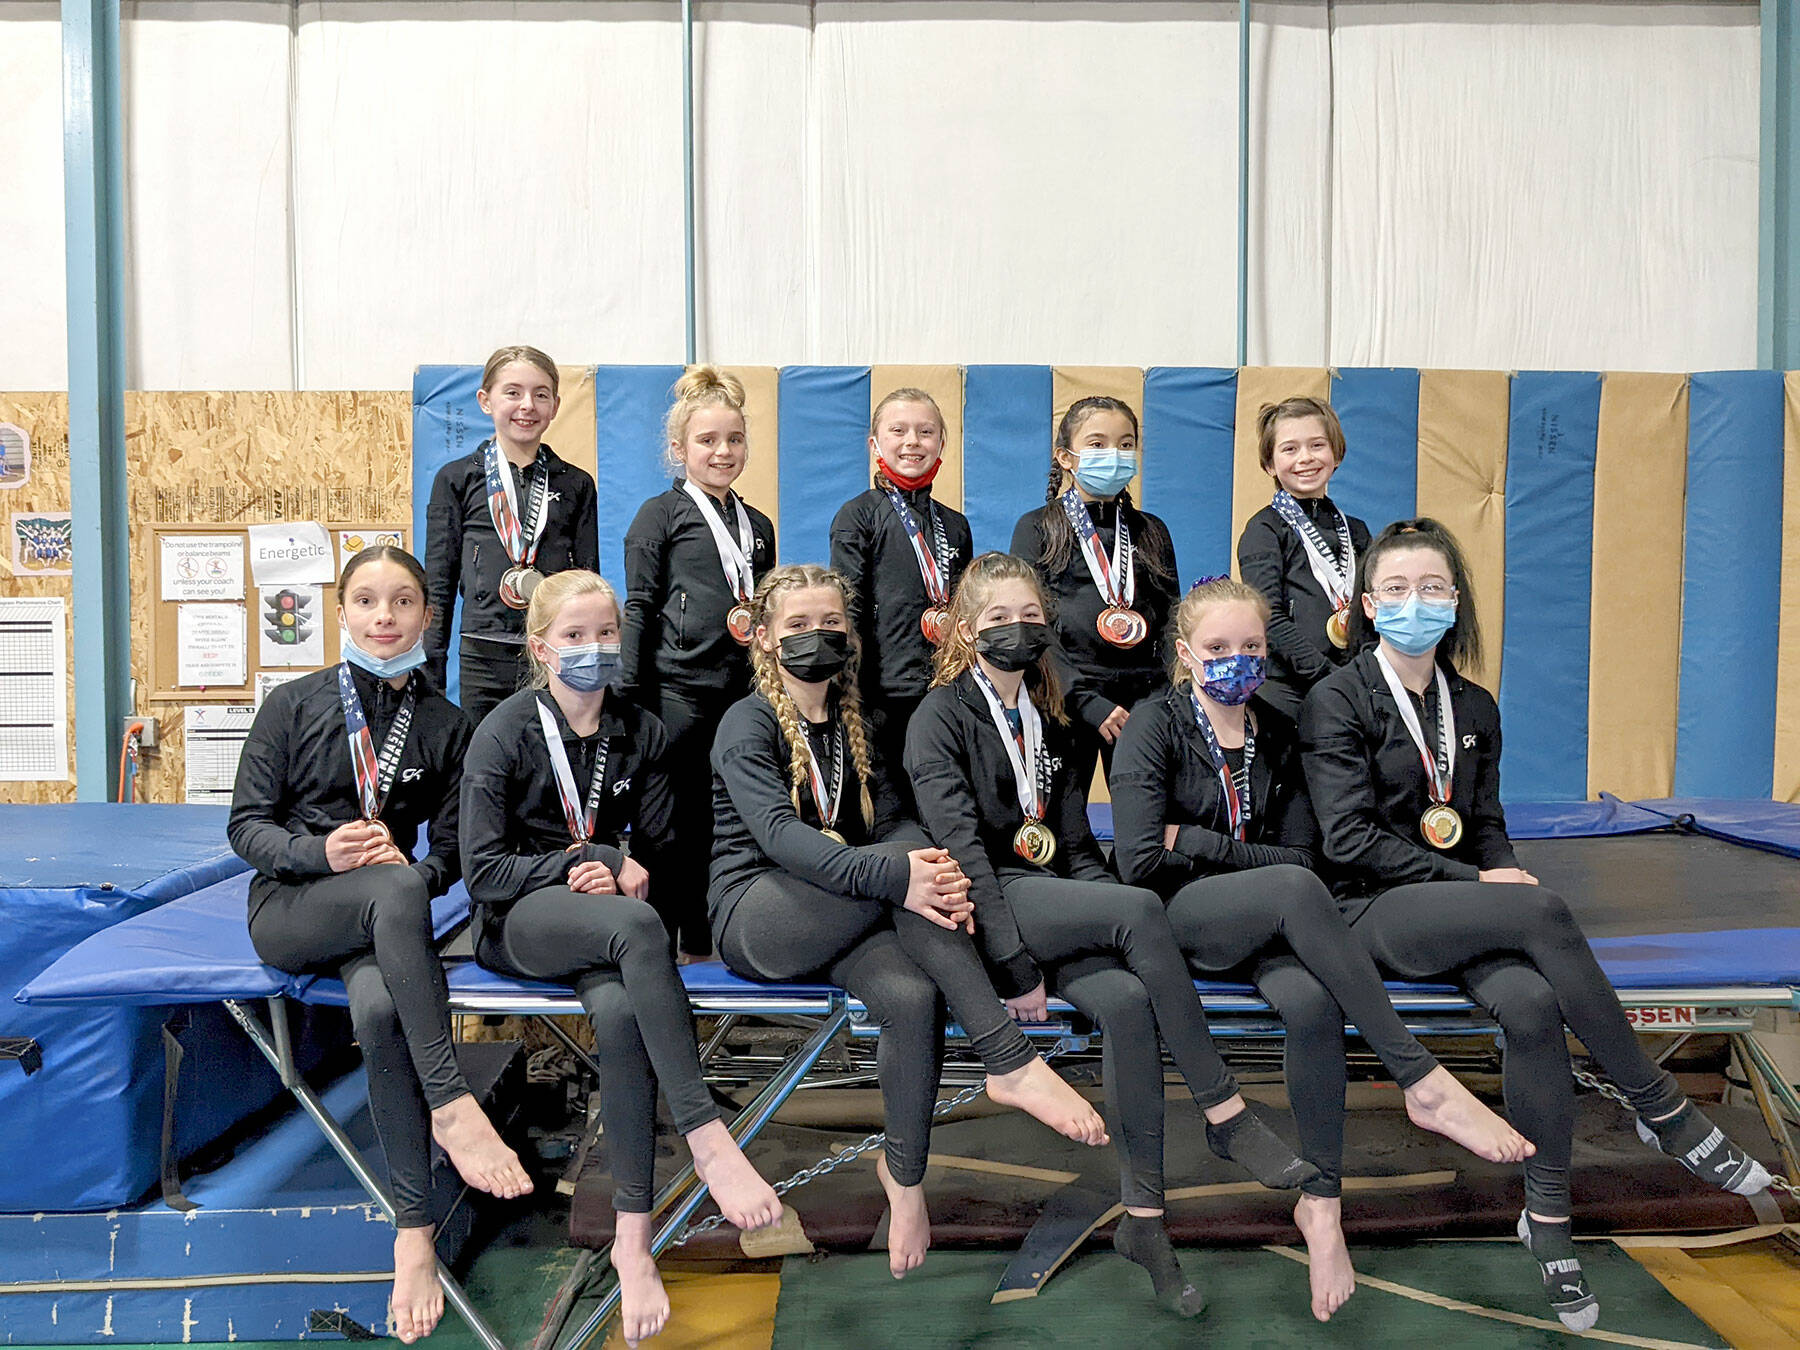 Klahhane Gymnastics performed well at The Freedom Invitational last weekend in Silverdale. Team members are, back row from left: Gracelyn Goss, Raynee Ciarlo, Elyse Brown, Kira Hartman and Harper Hilliker; and front row from left: Saffron Tschida, Mariah Traband, Neveah Thurman-Dupuis, Taylor Bugge, Lucy Spelker and Jessamyn Schindler.